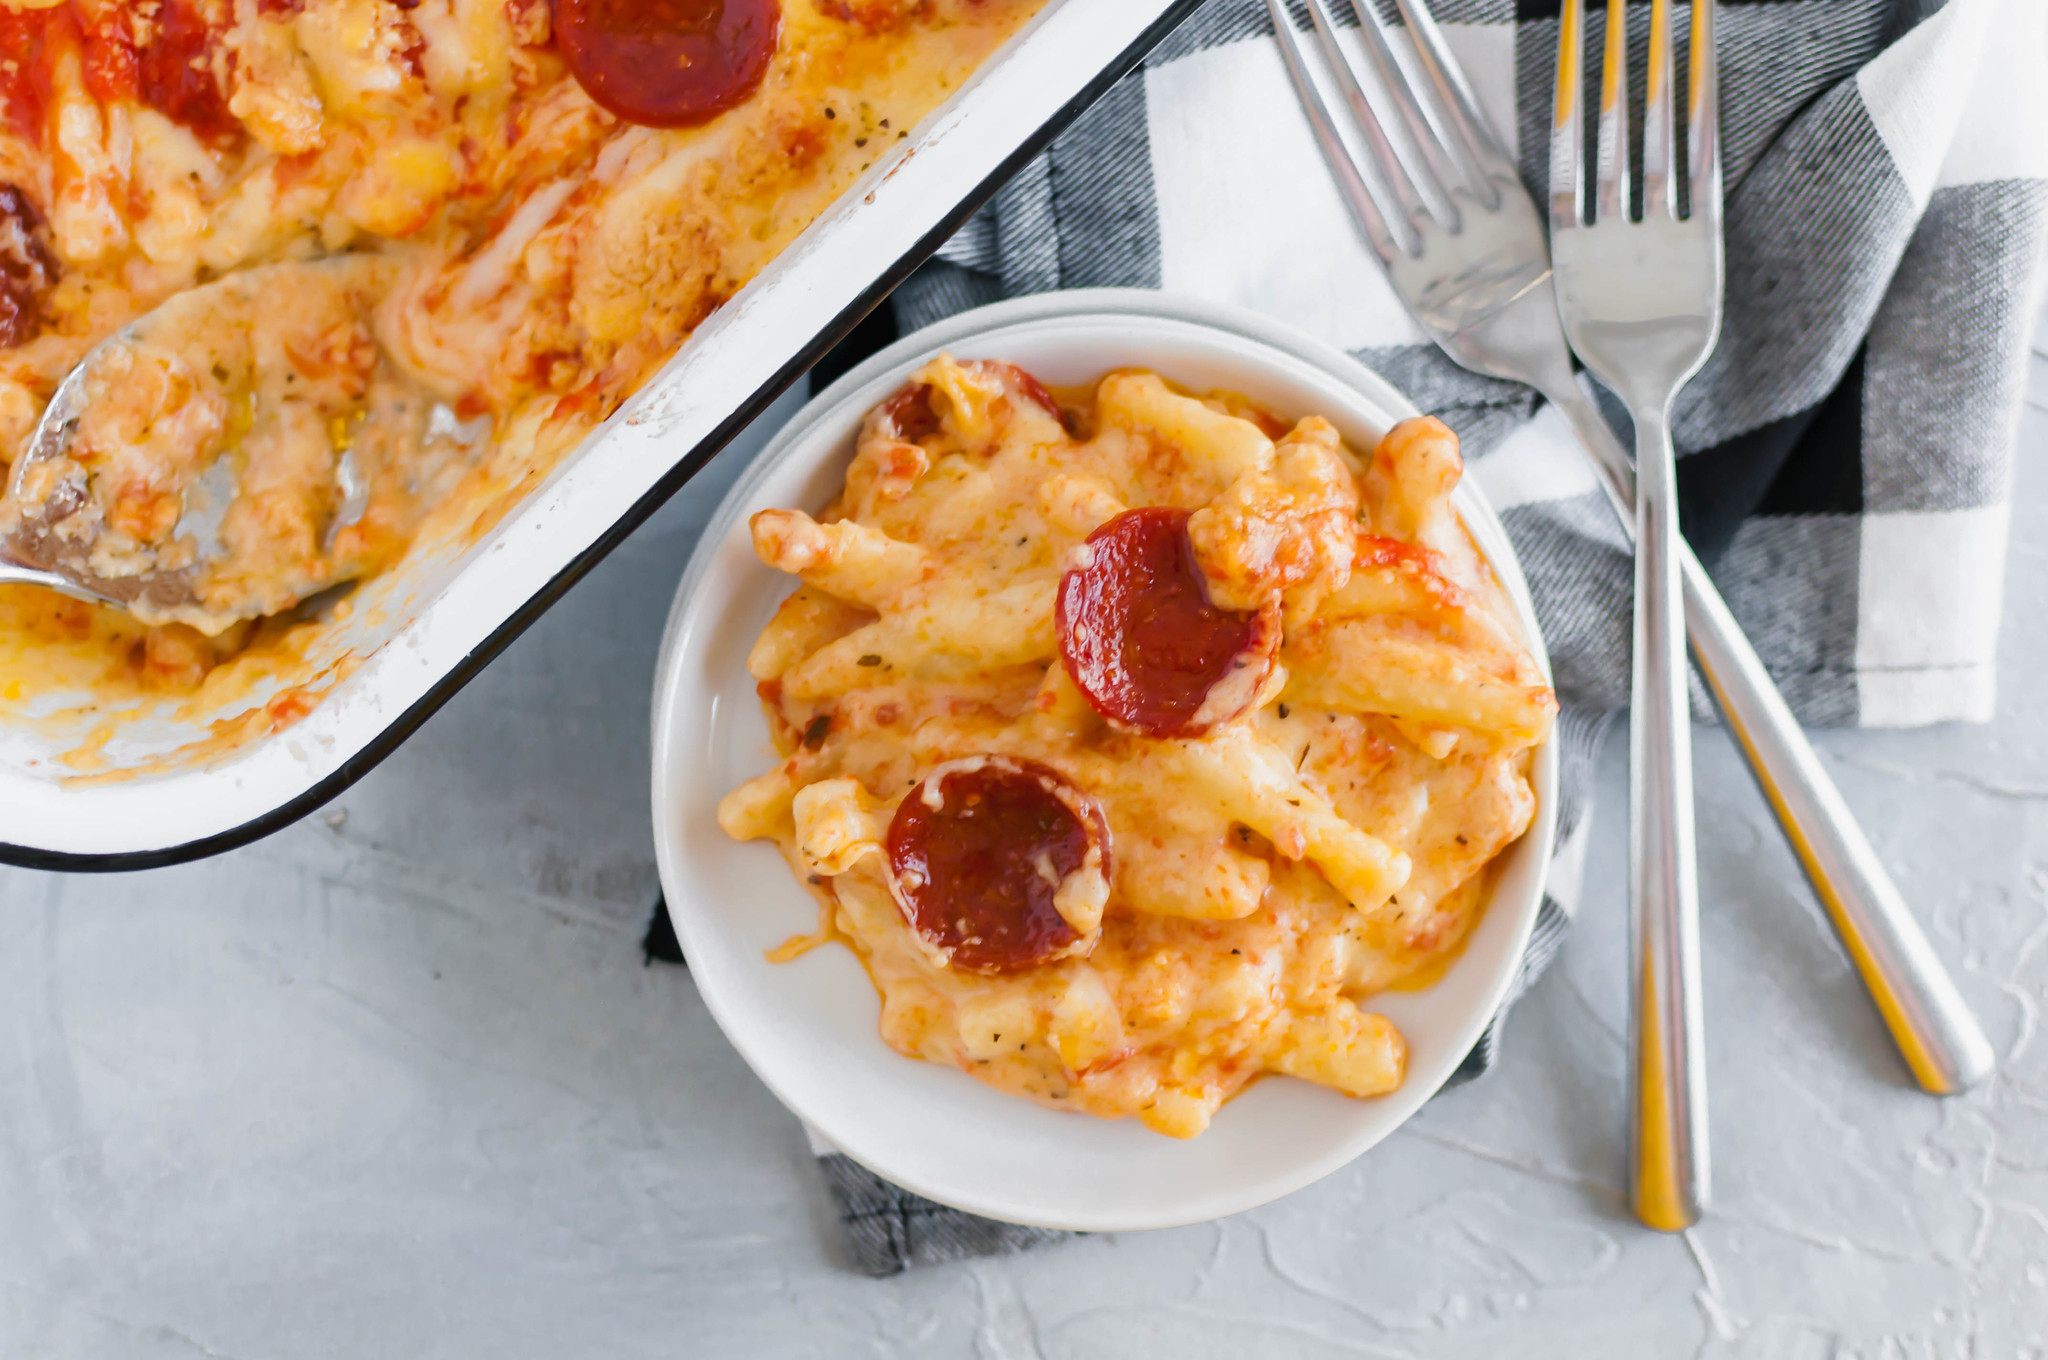 Two American favorites combine to make the most glorious Pizza Macaroni and Cheese. Creamy, cheesy pasta topped with pizza sauce, pepperoni and more cheese. Customize it and use your favorite toppings.